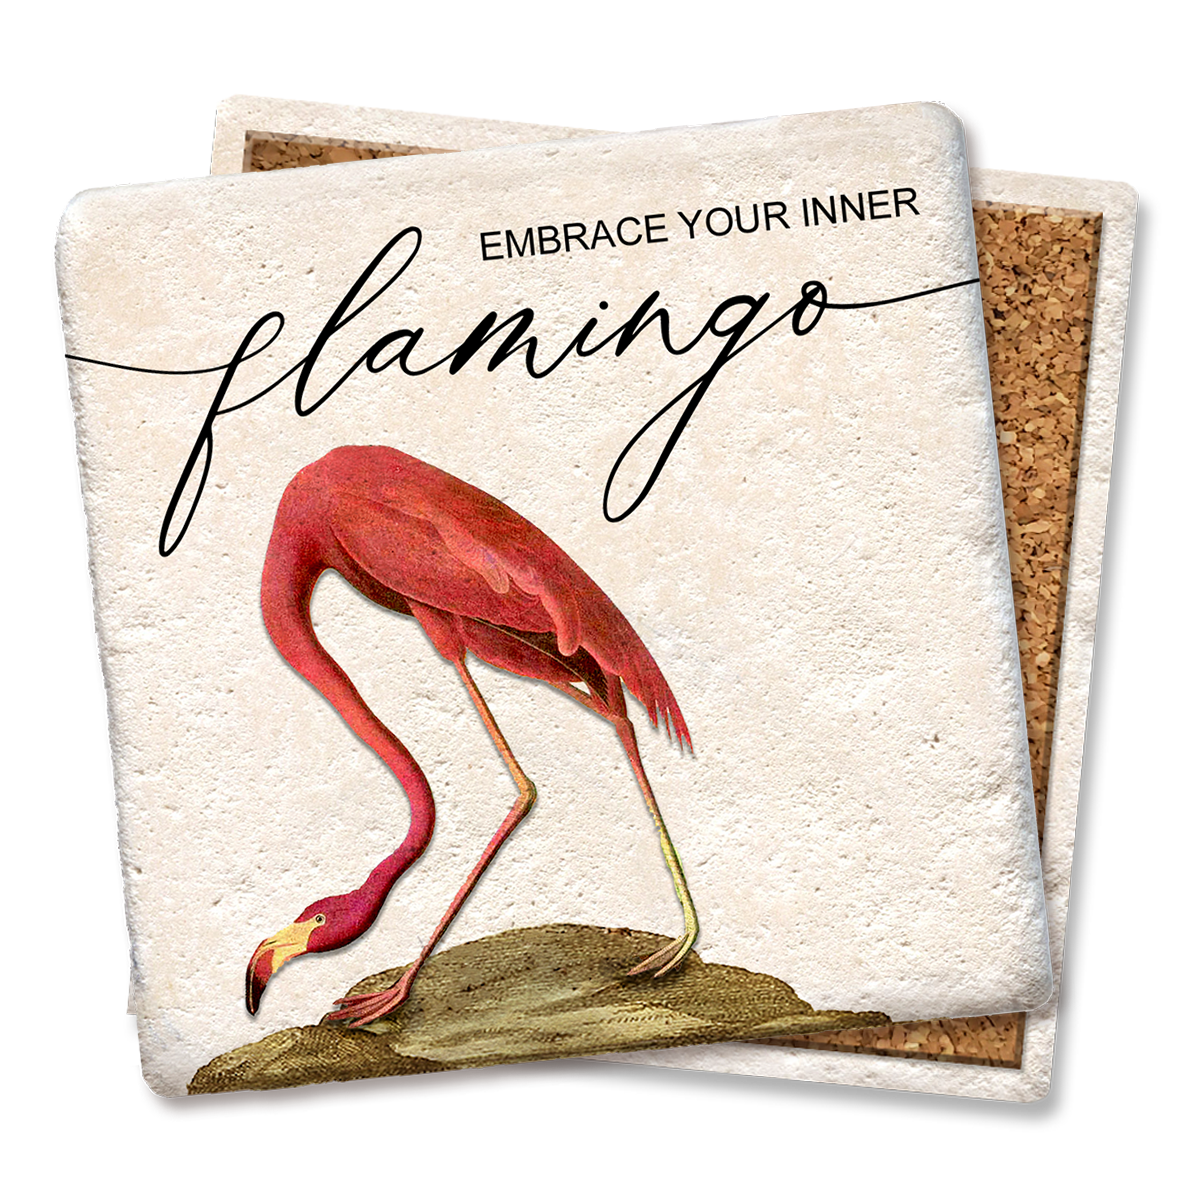 COASTERS EMBRACE YOUR INNER FLAMINGO COASTER  Tipsy Coasters & Gifts   